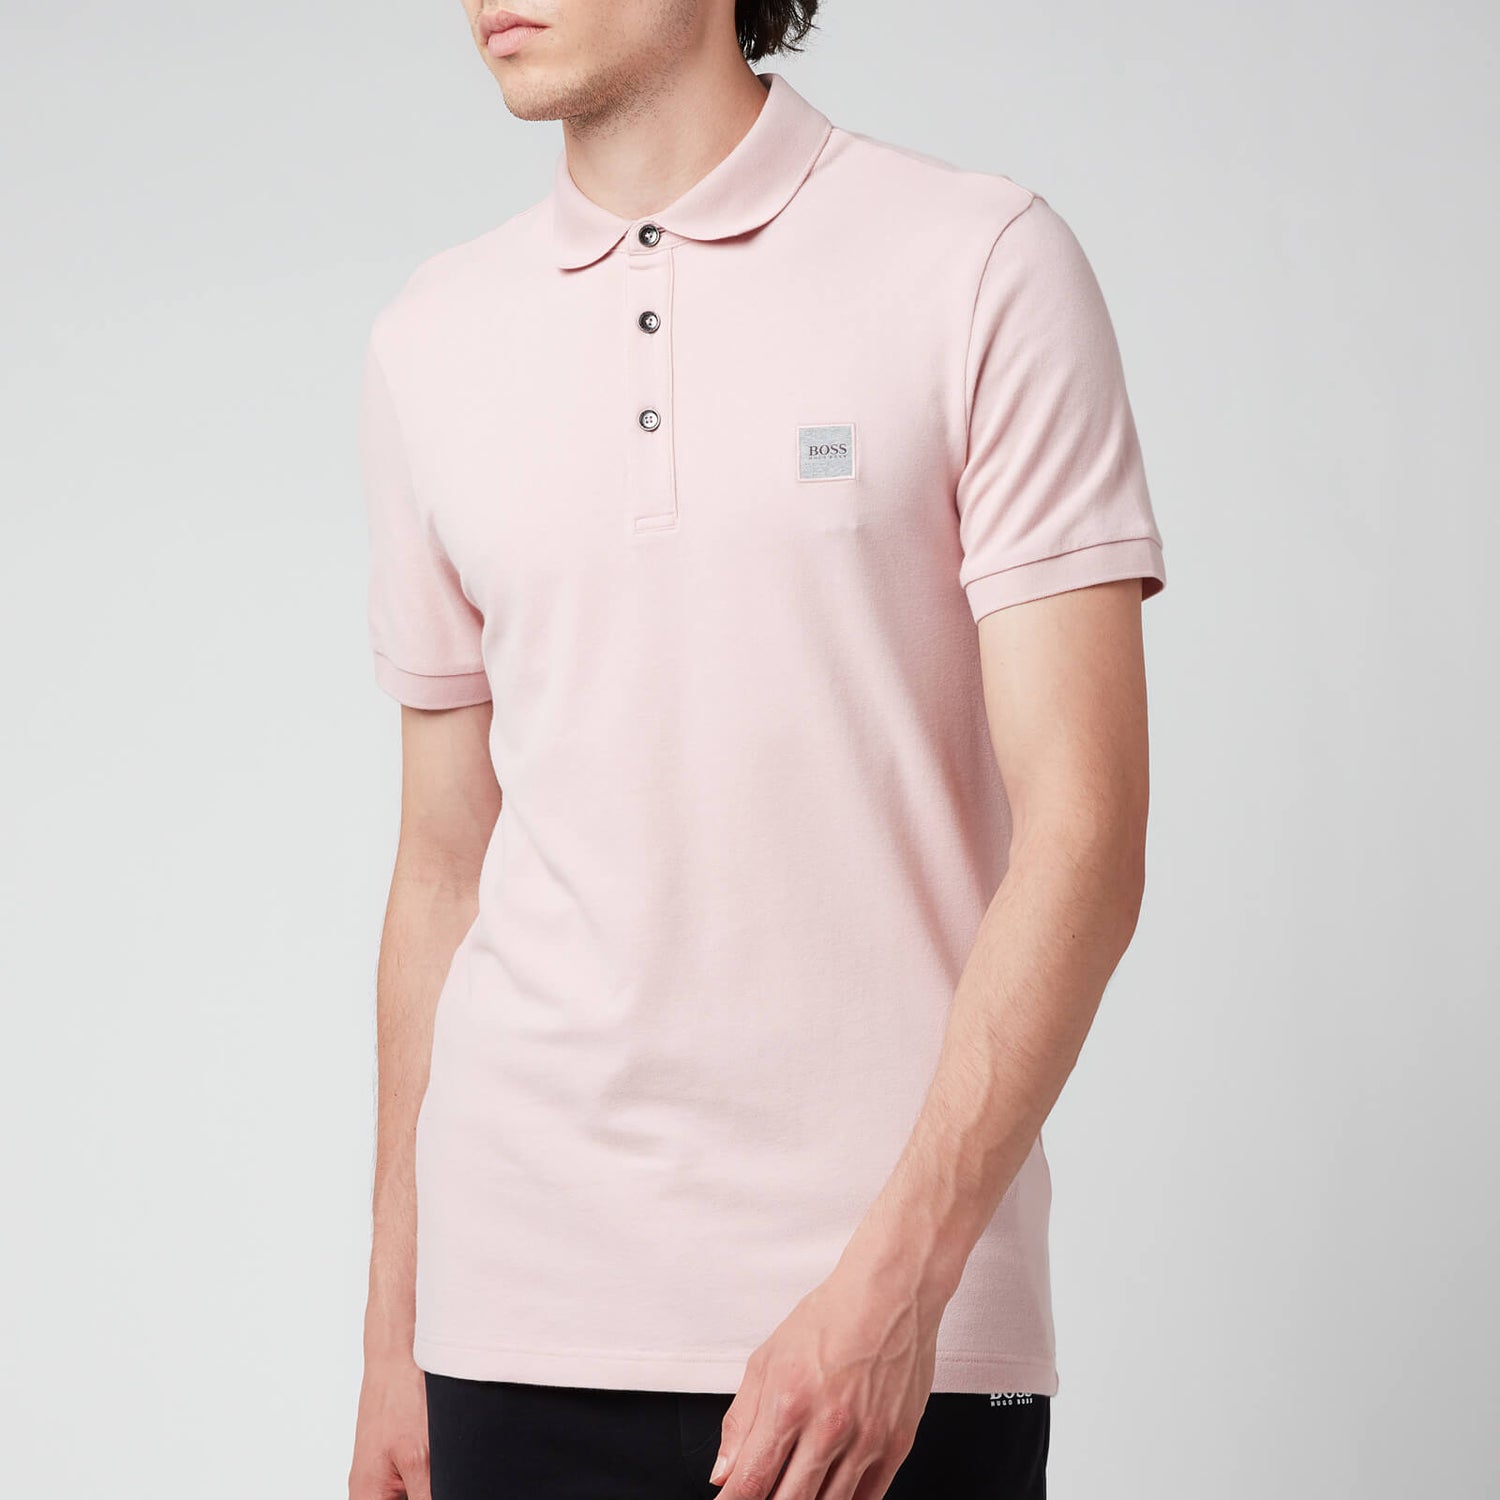 BOSS Casual Men's Washed Pique Polo Shirt - Light Pastel Pink